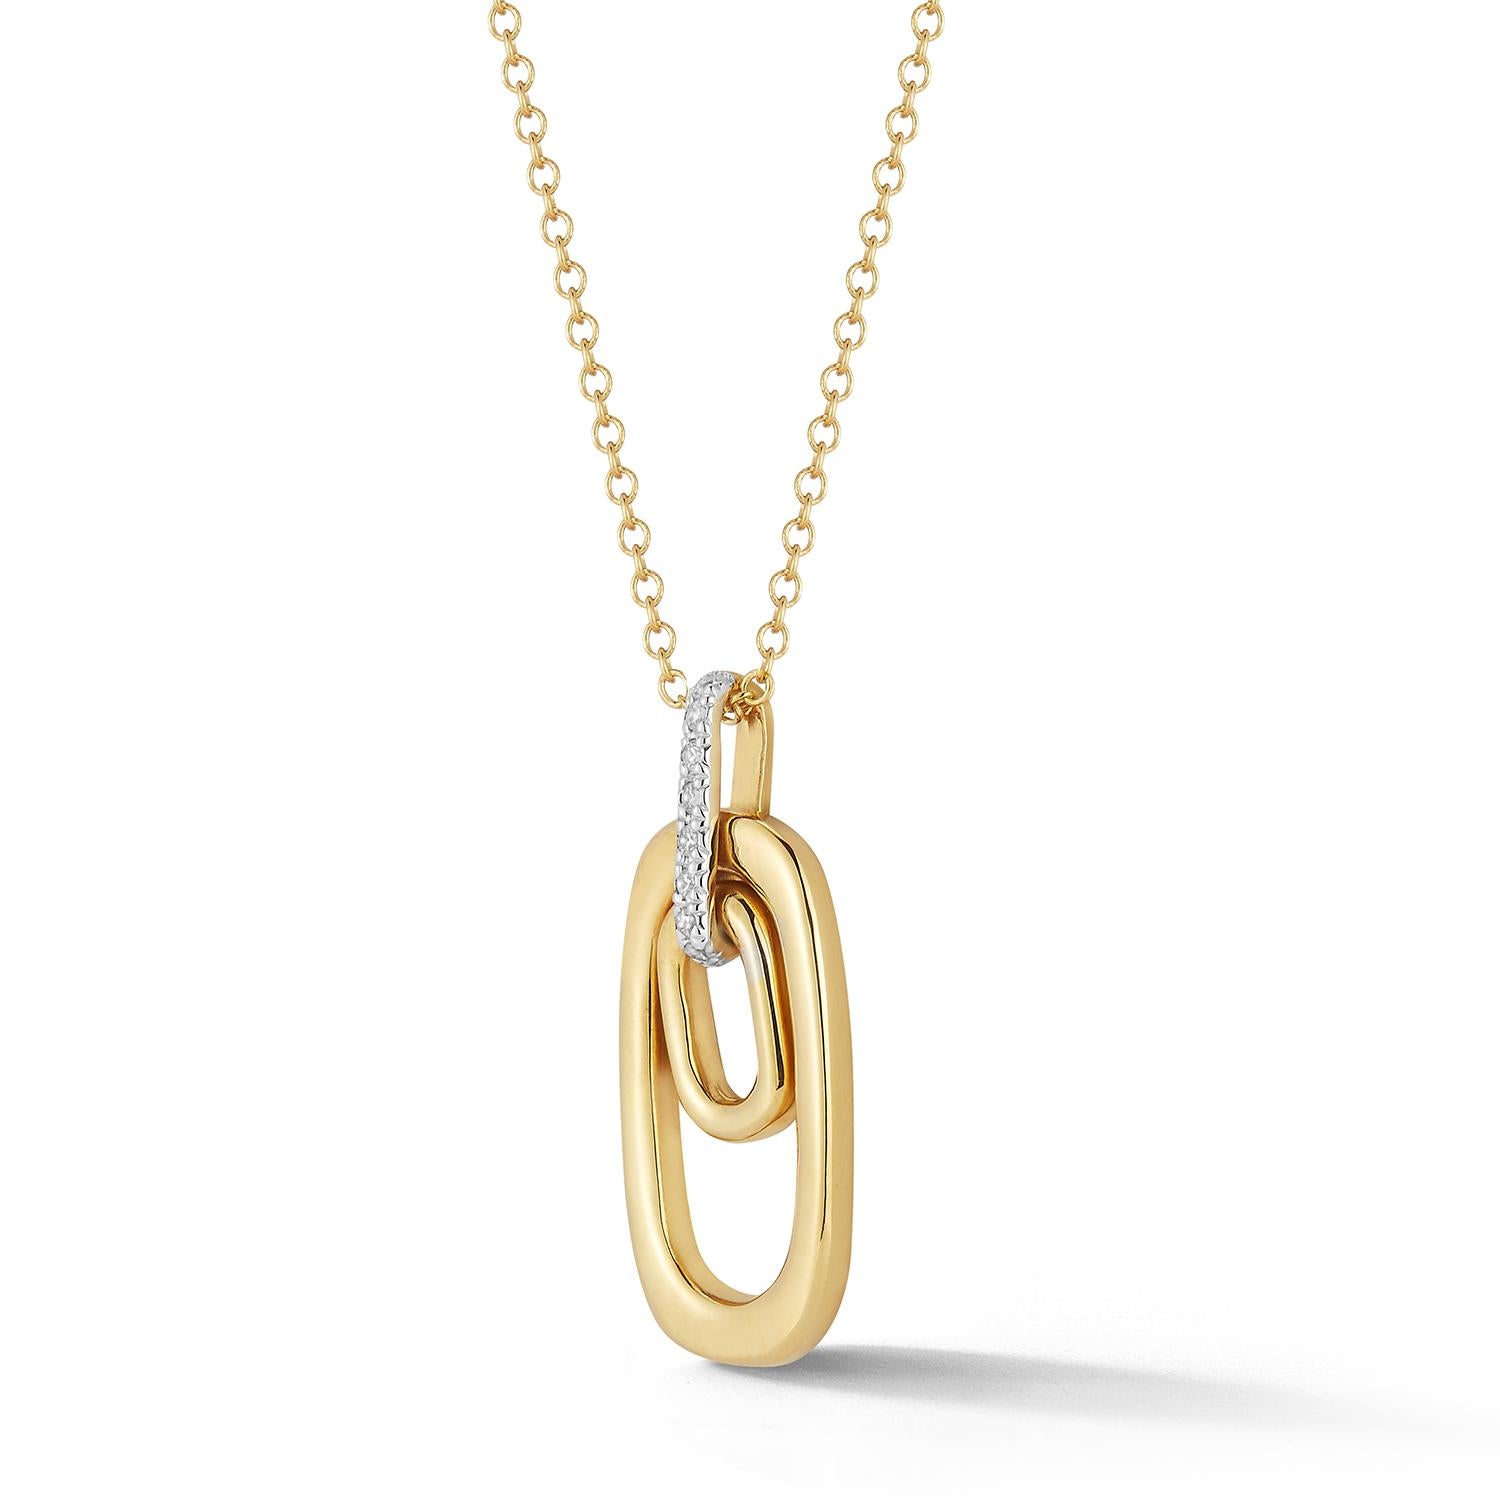 14 Karat Yellow Gold Hand-Crafted High-Polish Finished Small and Large Ellipse Pendant, Accented with 0.08 Carats of Pave Set Diamonds, Sliding on a 16